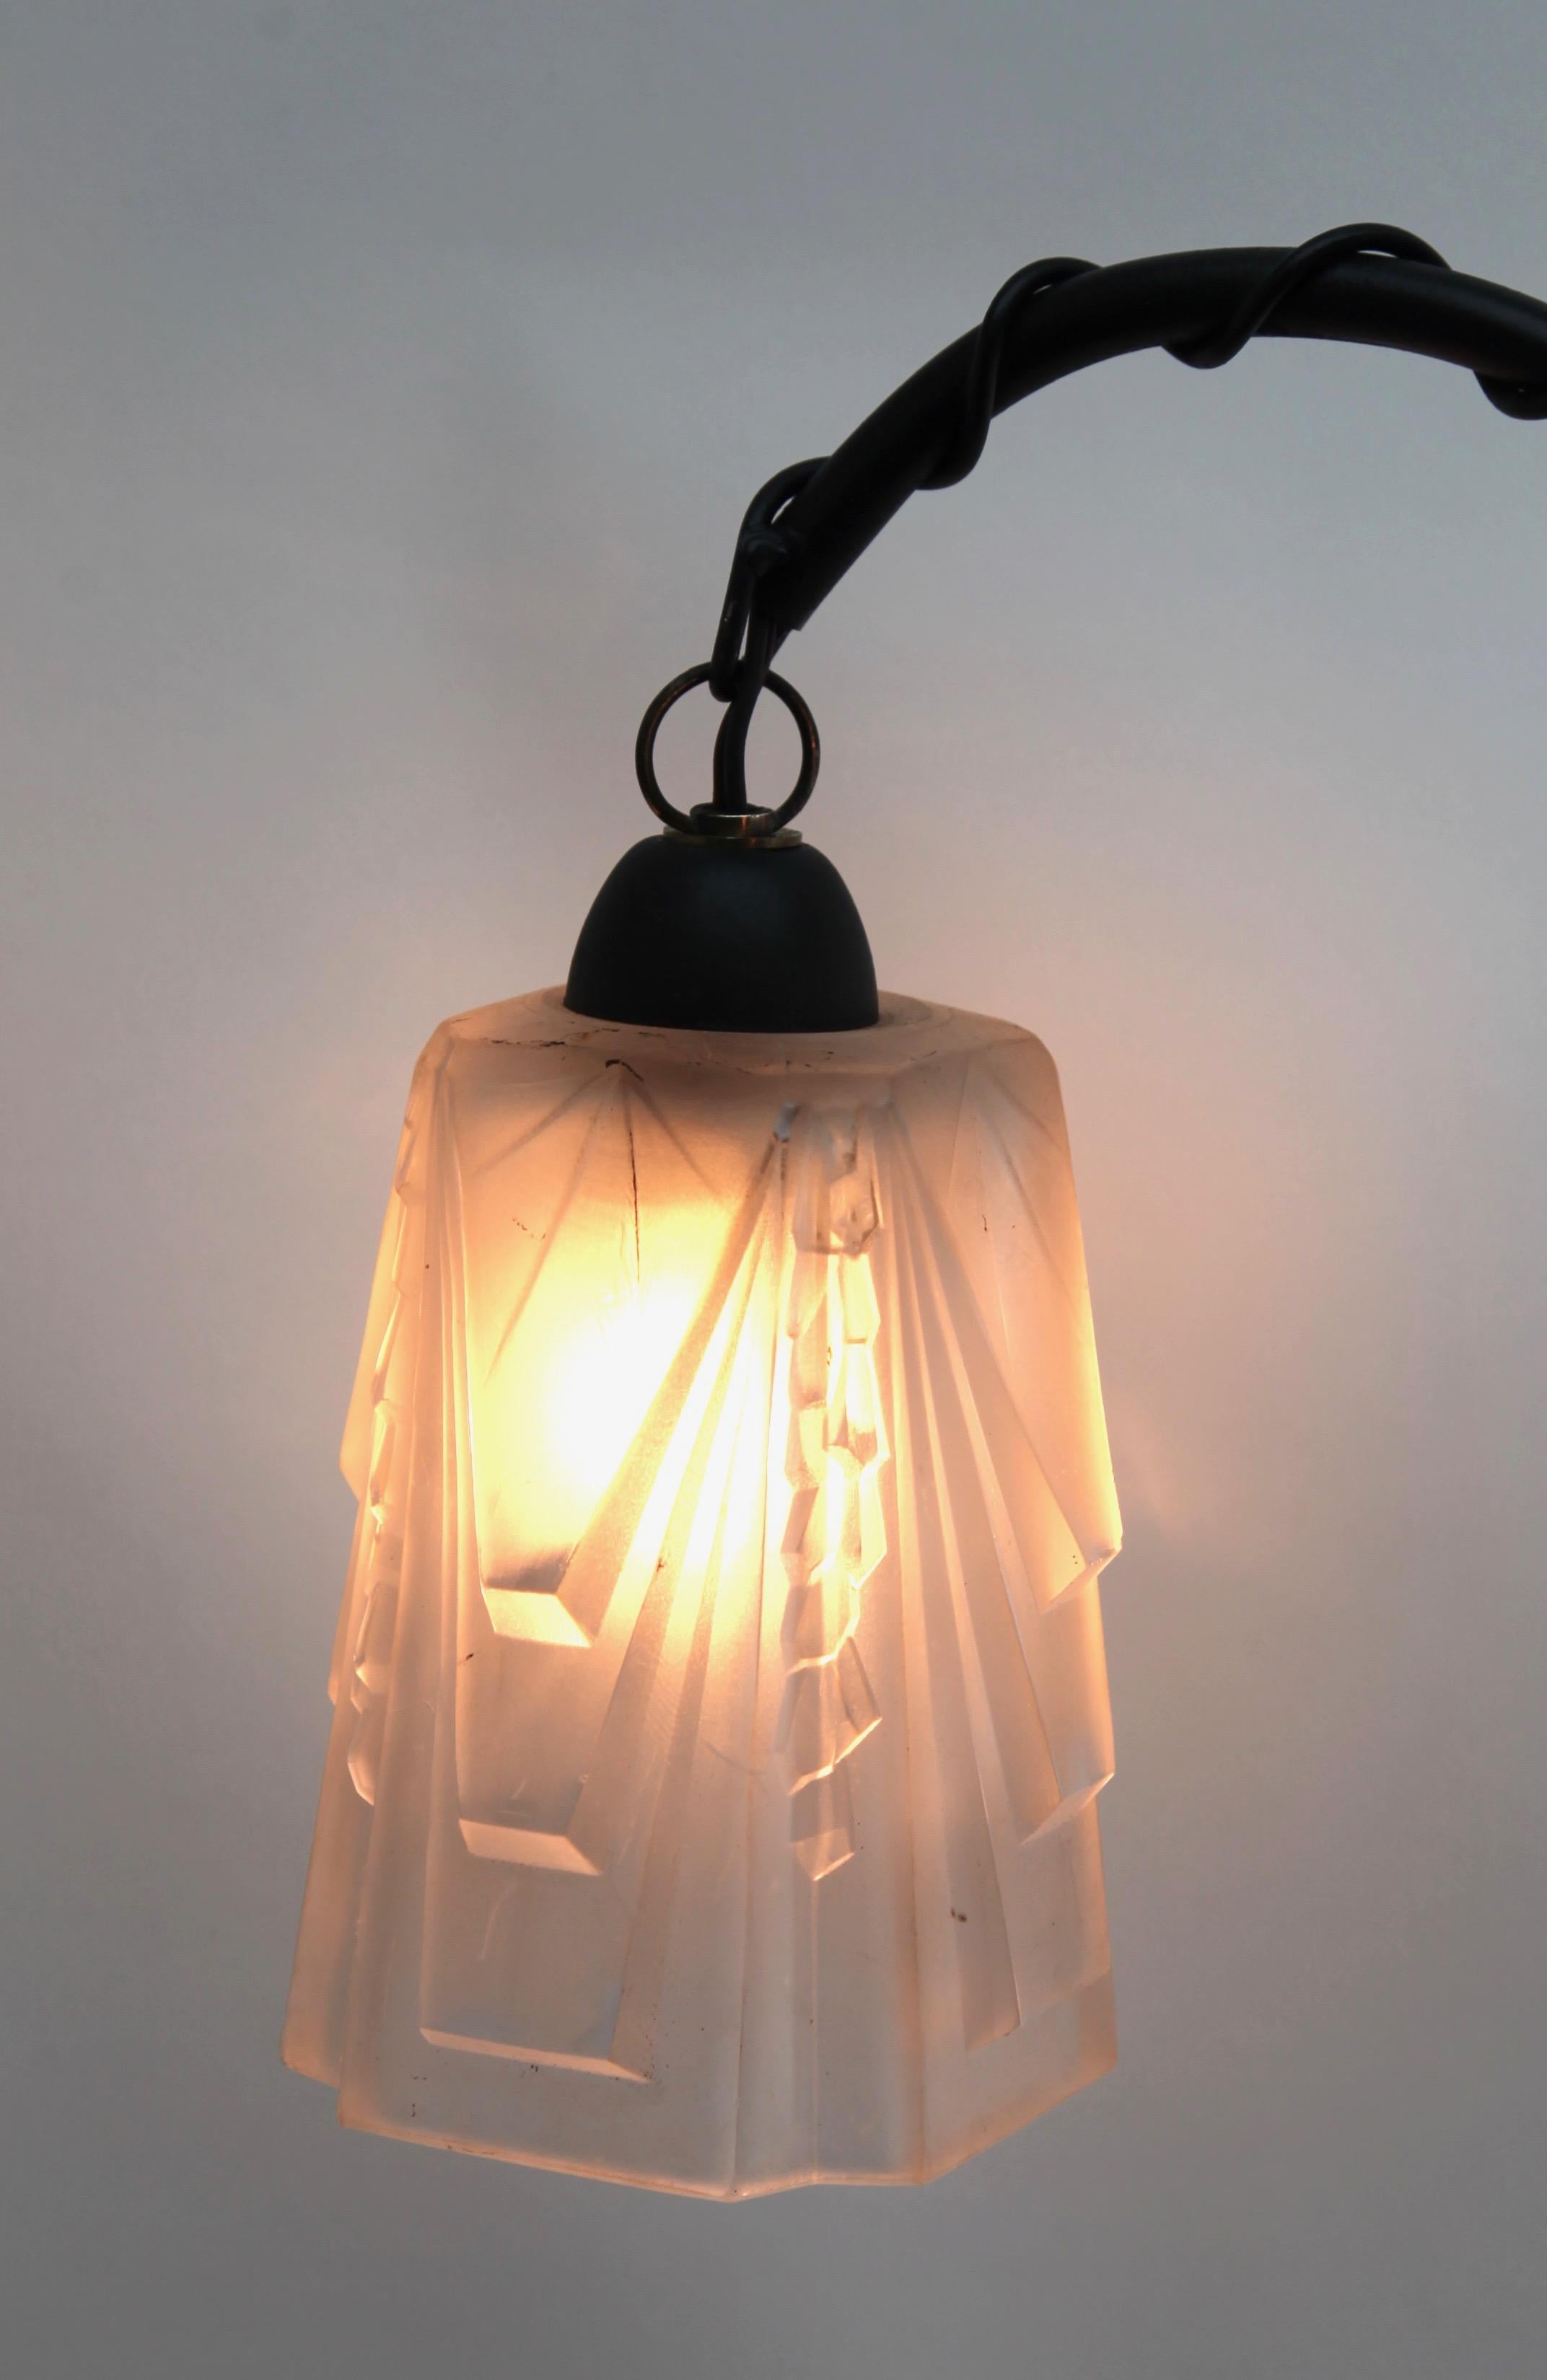 Chandelier by Muller Freres Luneville, shades are signed 1900s
Photography fails to capture the simple elegant illumination provided by this lamp.

In excellent condition and in full working order having recently been re-wired and 
provided with a